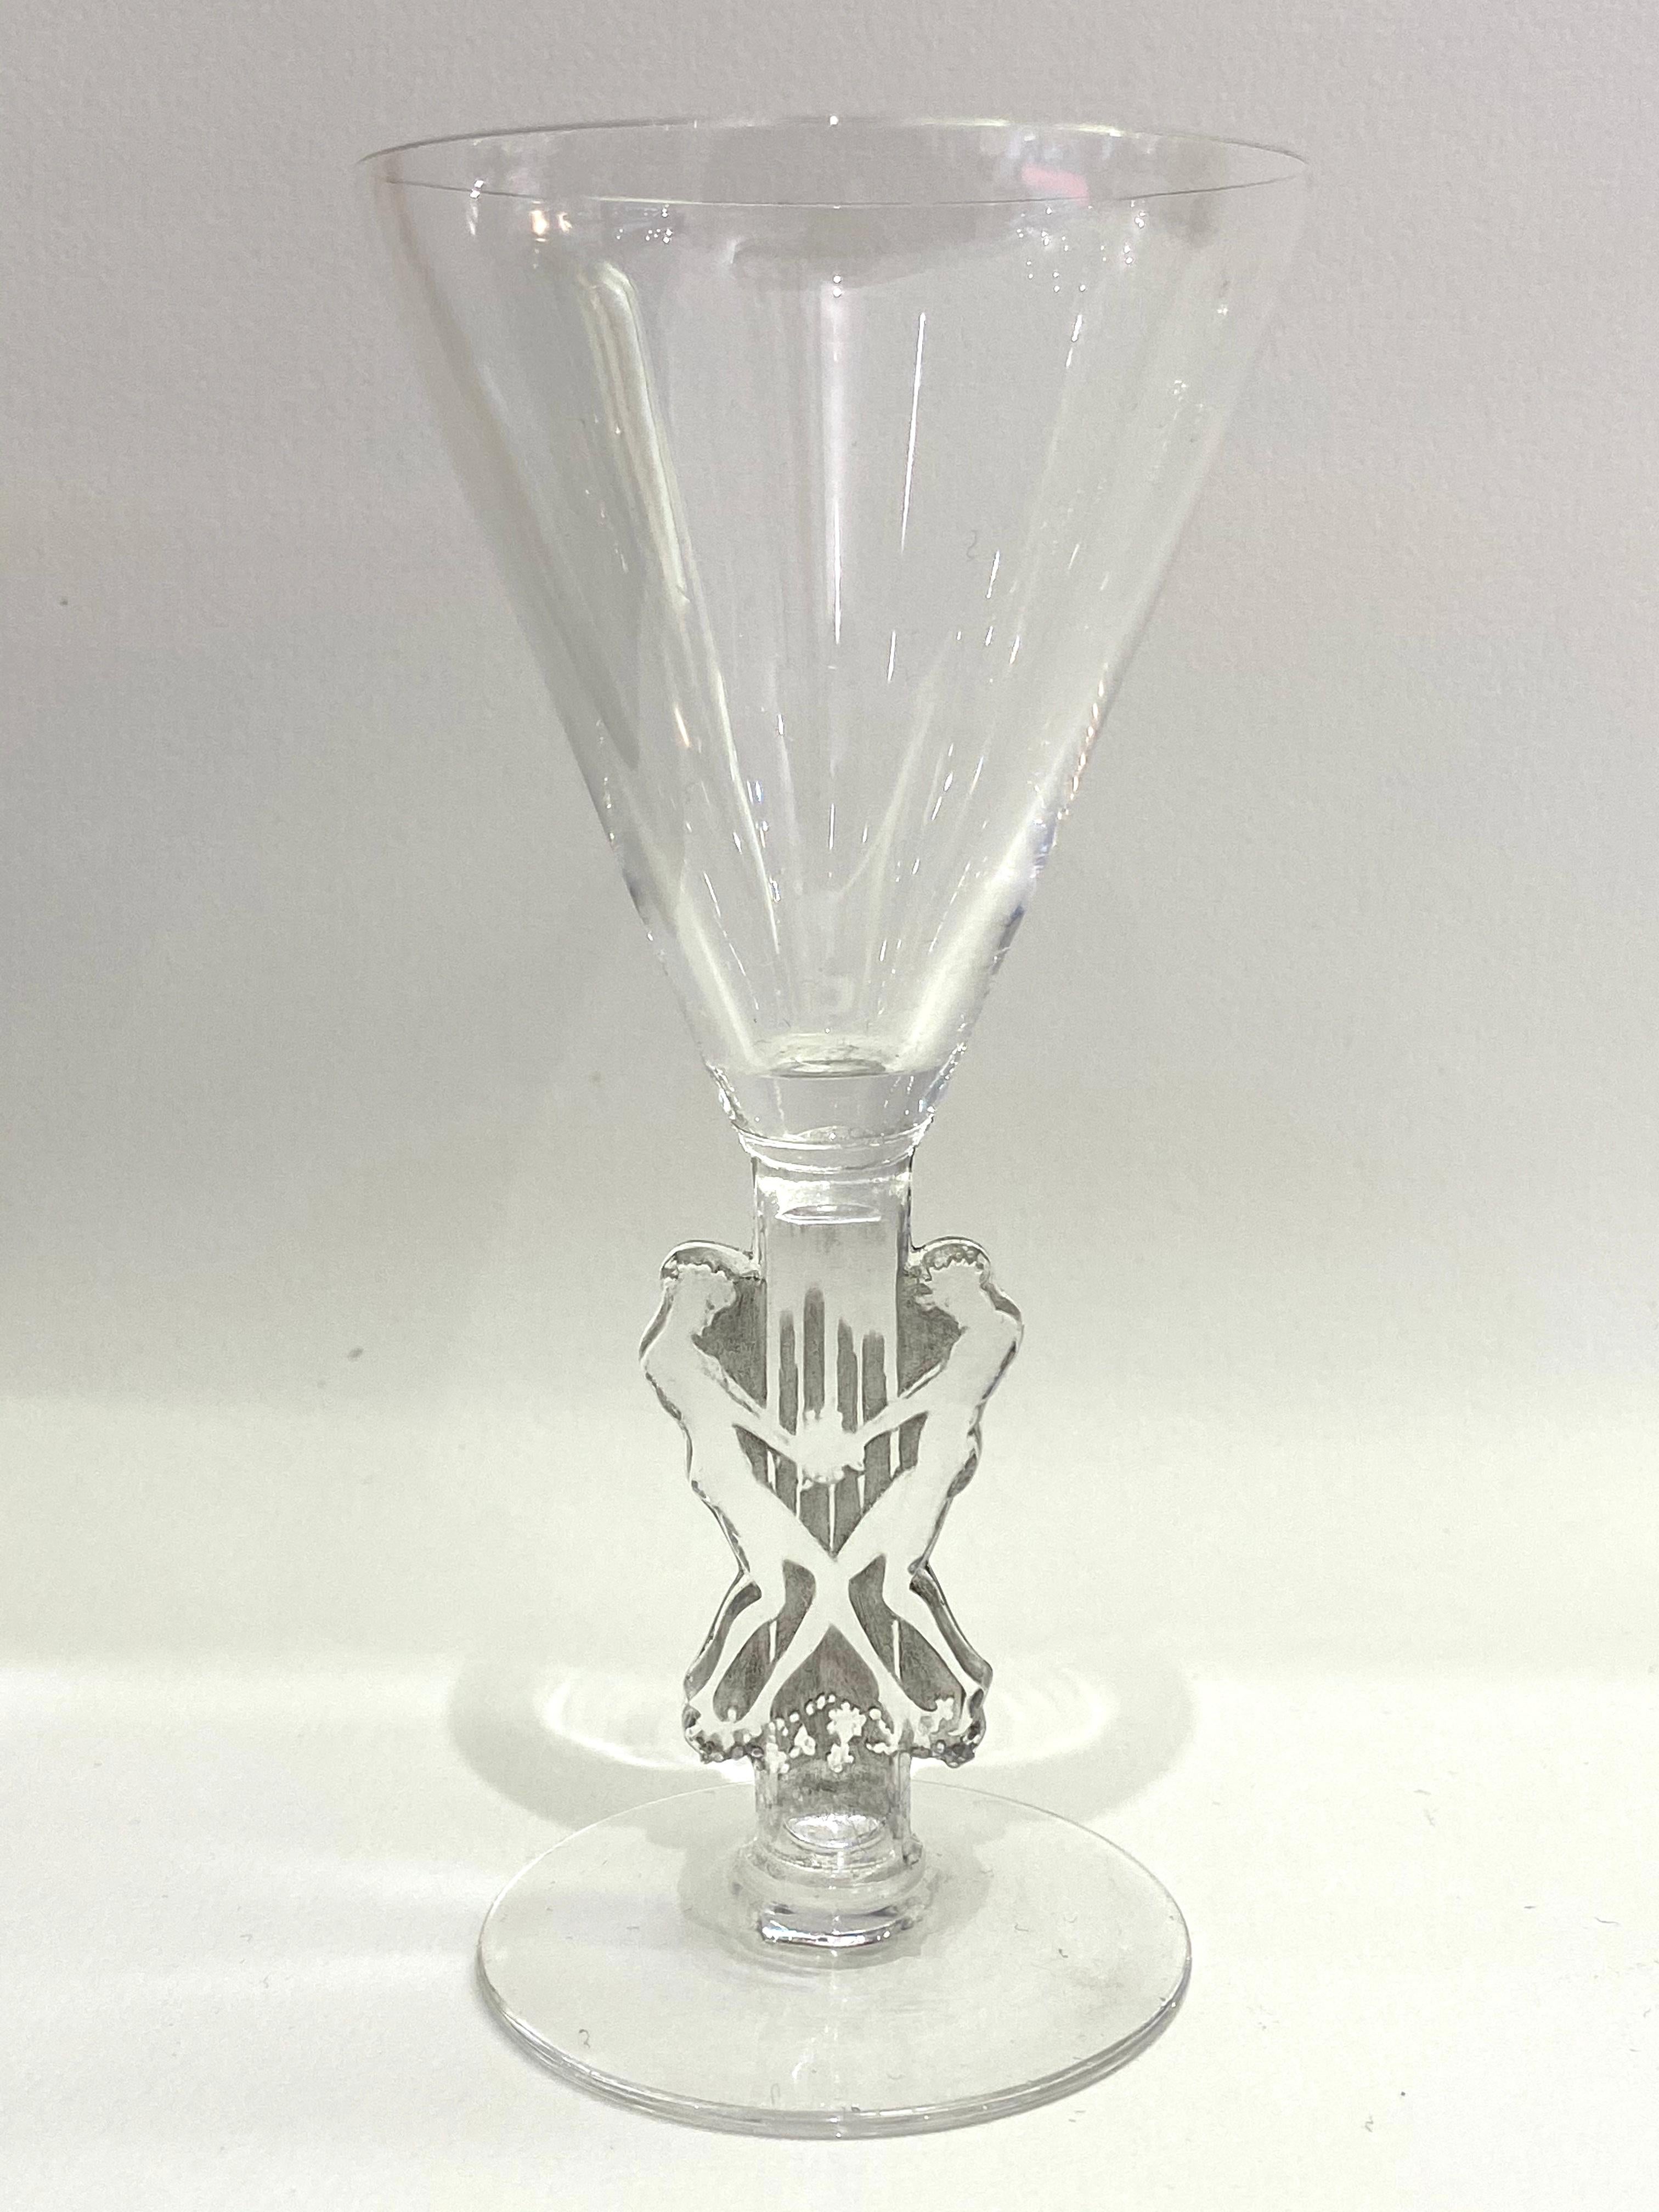 Set of 9 drinking glasses made by René Lalique in 1926. Model is named 